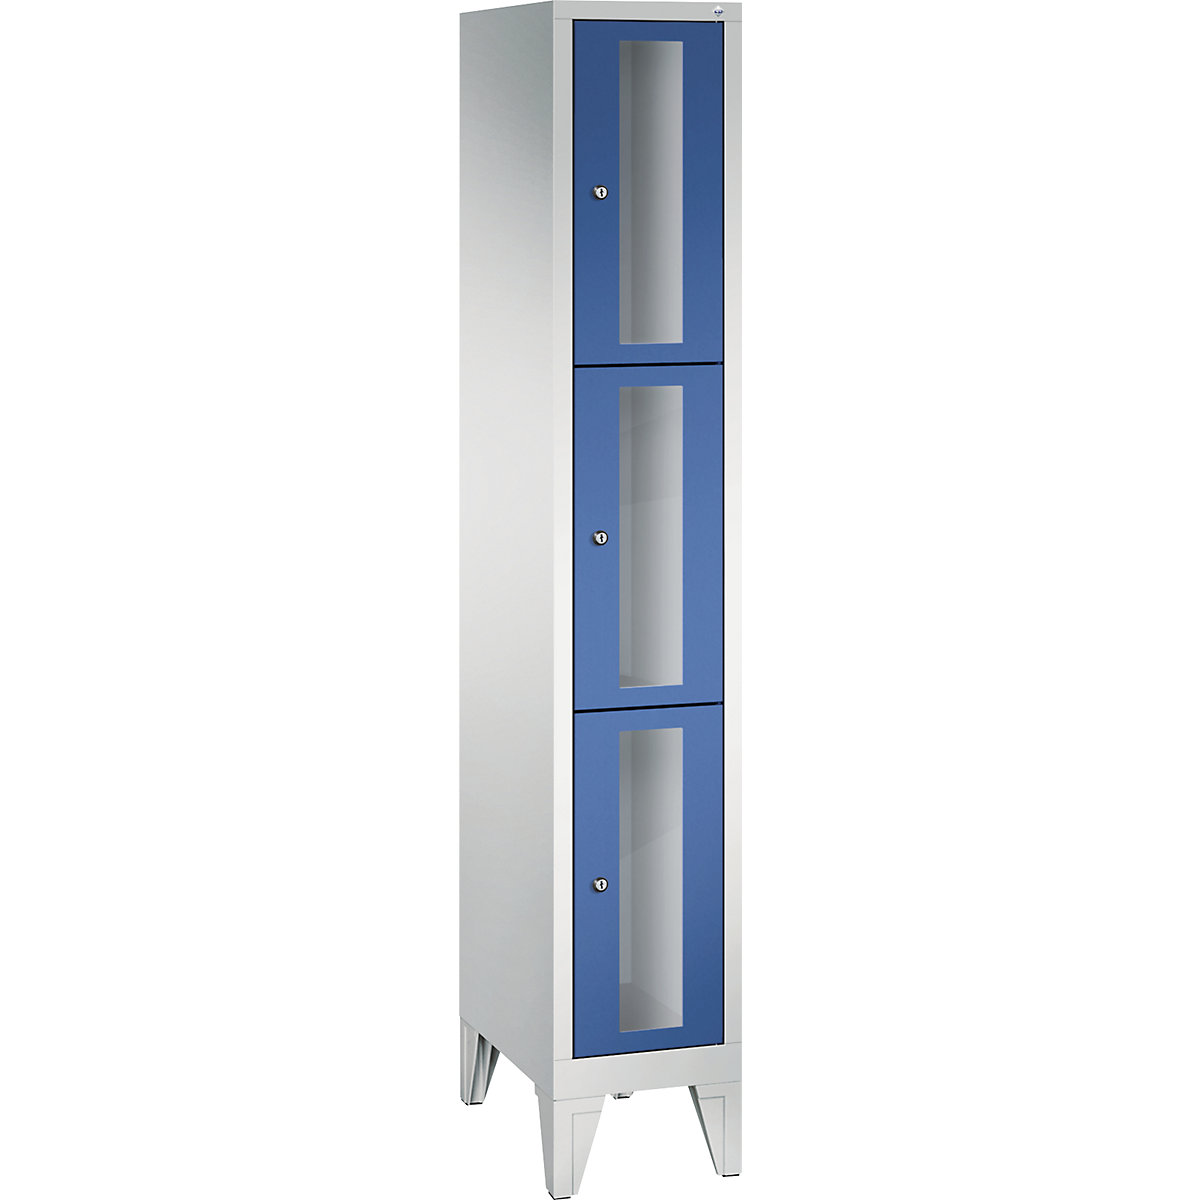 CLASSIC locker unit, compartment height 510 mm, with feet – C+P, 3 compartments, width 320 mm, gentian blue door-3